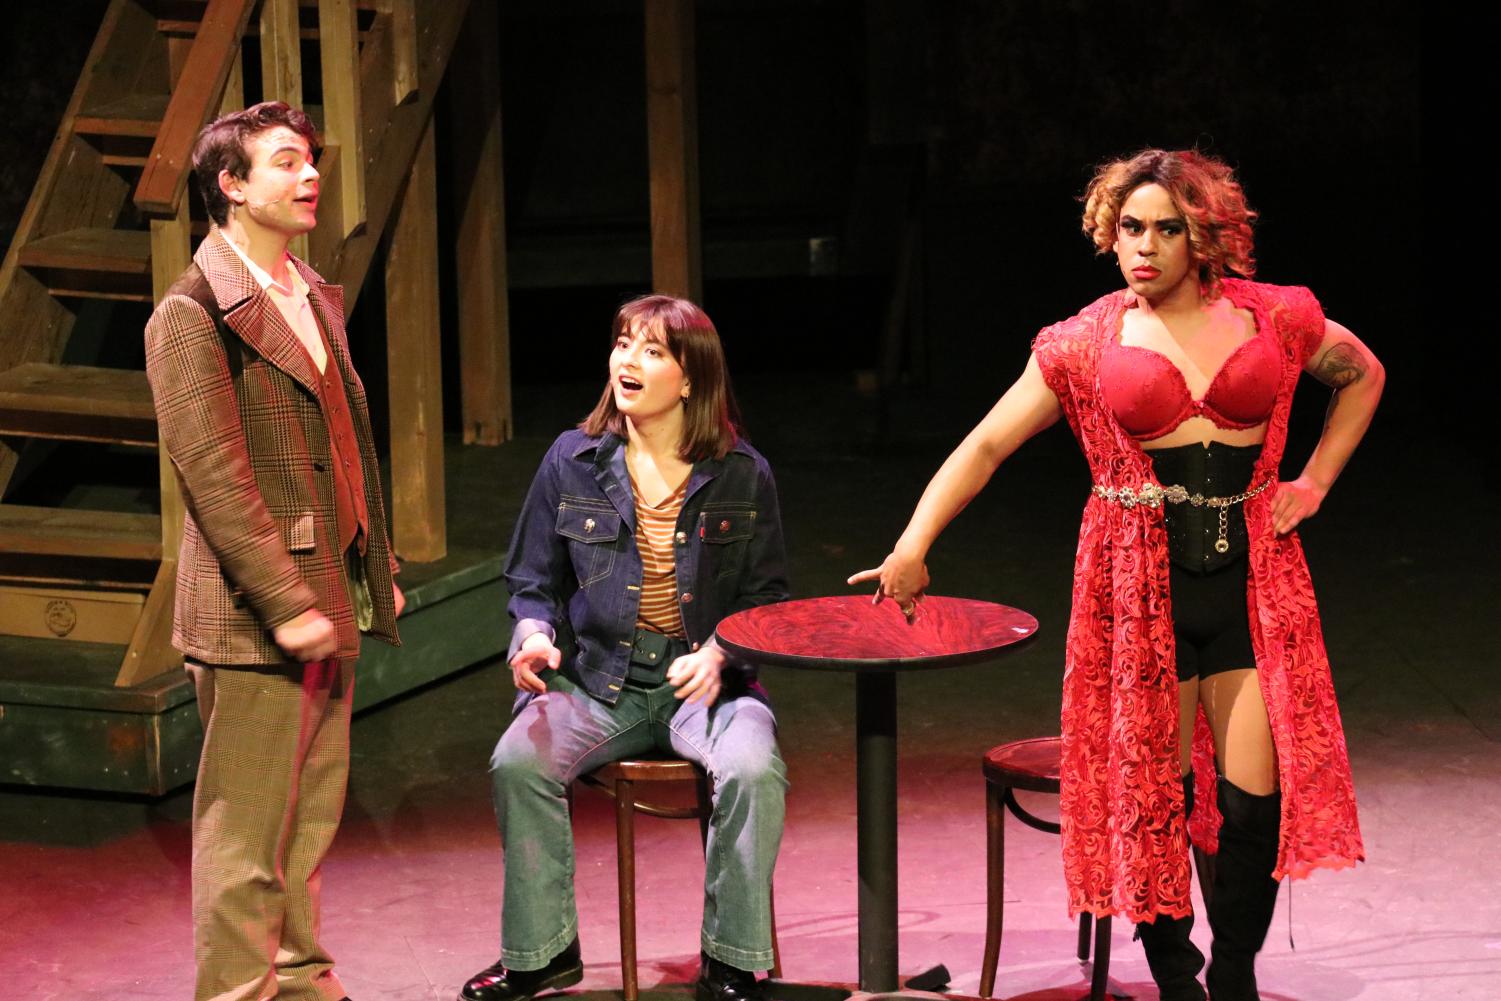 Dylan Woodford (Left), Celina Kott (Center), and Christopher J. Thume (Right) perform in "Kinky Boots" at the Performing Arts Center on March 9, 2022 at Moorpark, CA.